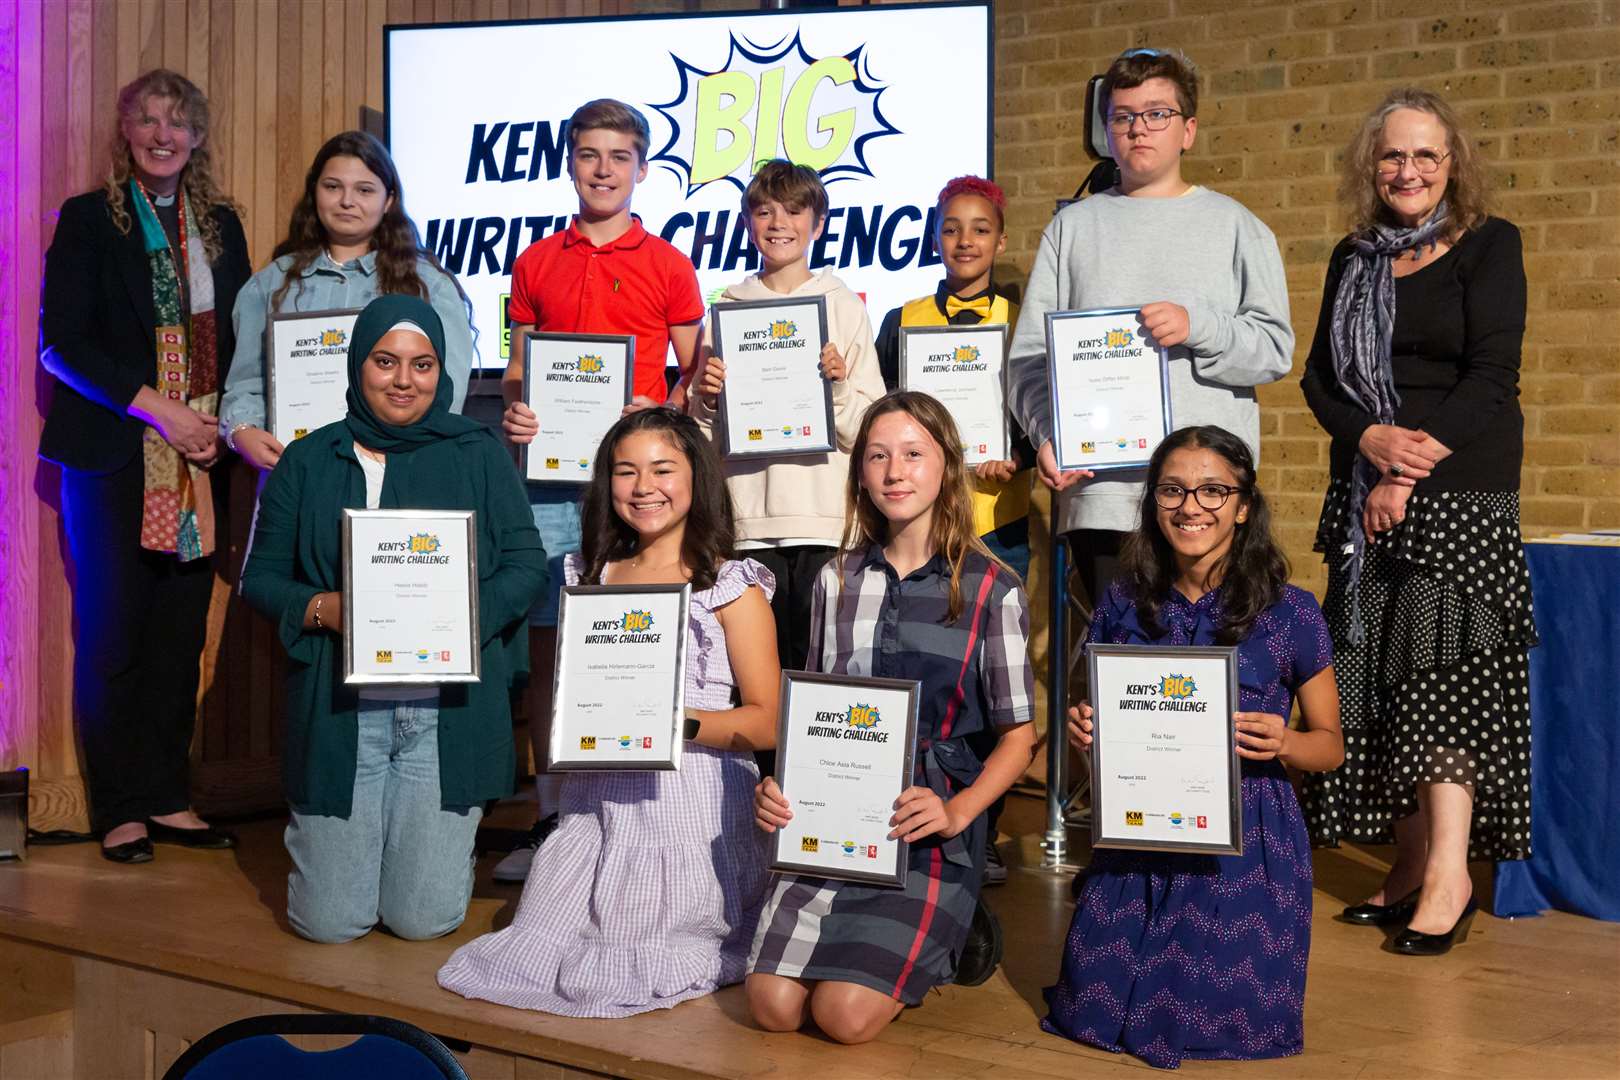 Children from across Kent attended the awards ceremony for this year's Big Writing Challenge. All images: Martin Apps of Countrywide Photographic